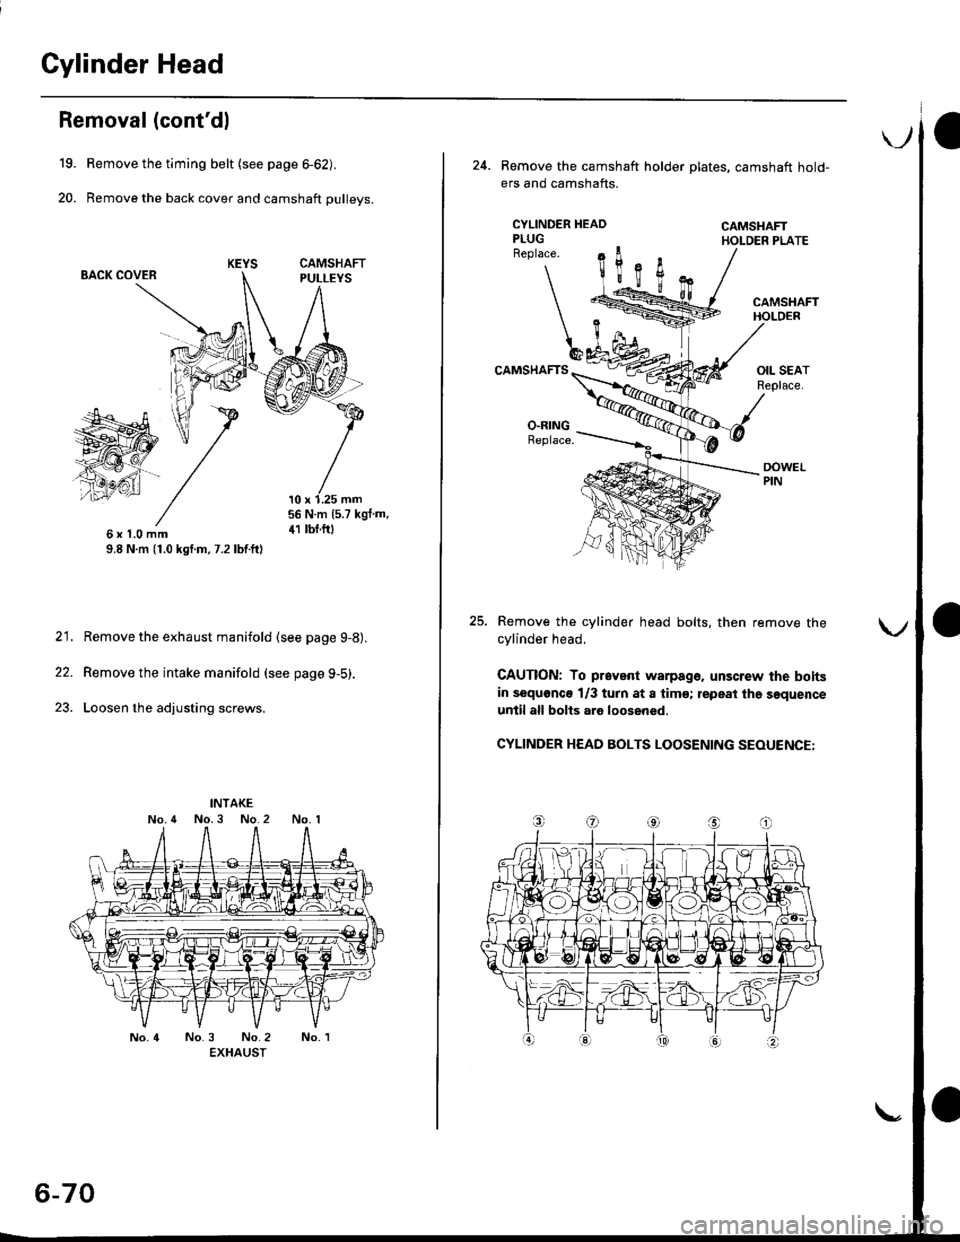 HONDA CIVIC 2000 6.G Workshop Manual Cylinder Head
19.
20.
Removal (contdl
Remove the timing belt {see page 6-62).
Remove the back cover and camshaft pulleys.
BACK COVER
56 N.m (5.7 kgf m,
41 tbt.f06xl.0mm9.8 N,m (1.0 kgf.m, 7.2 lbf.ft)